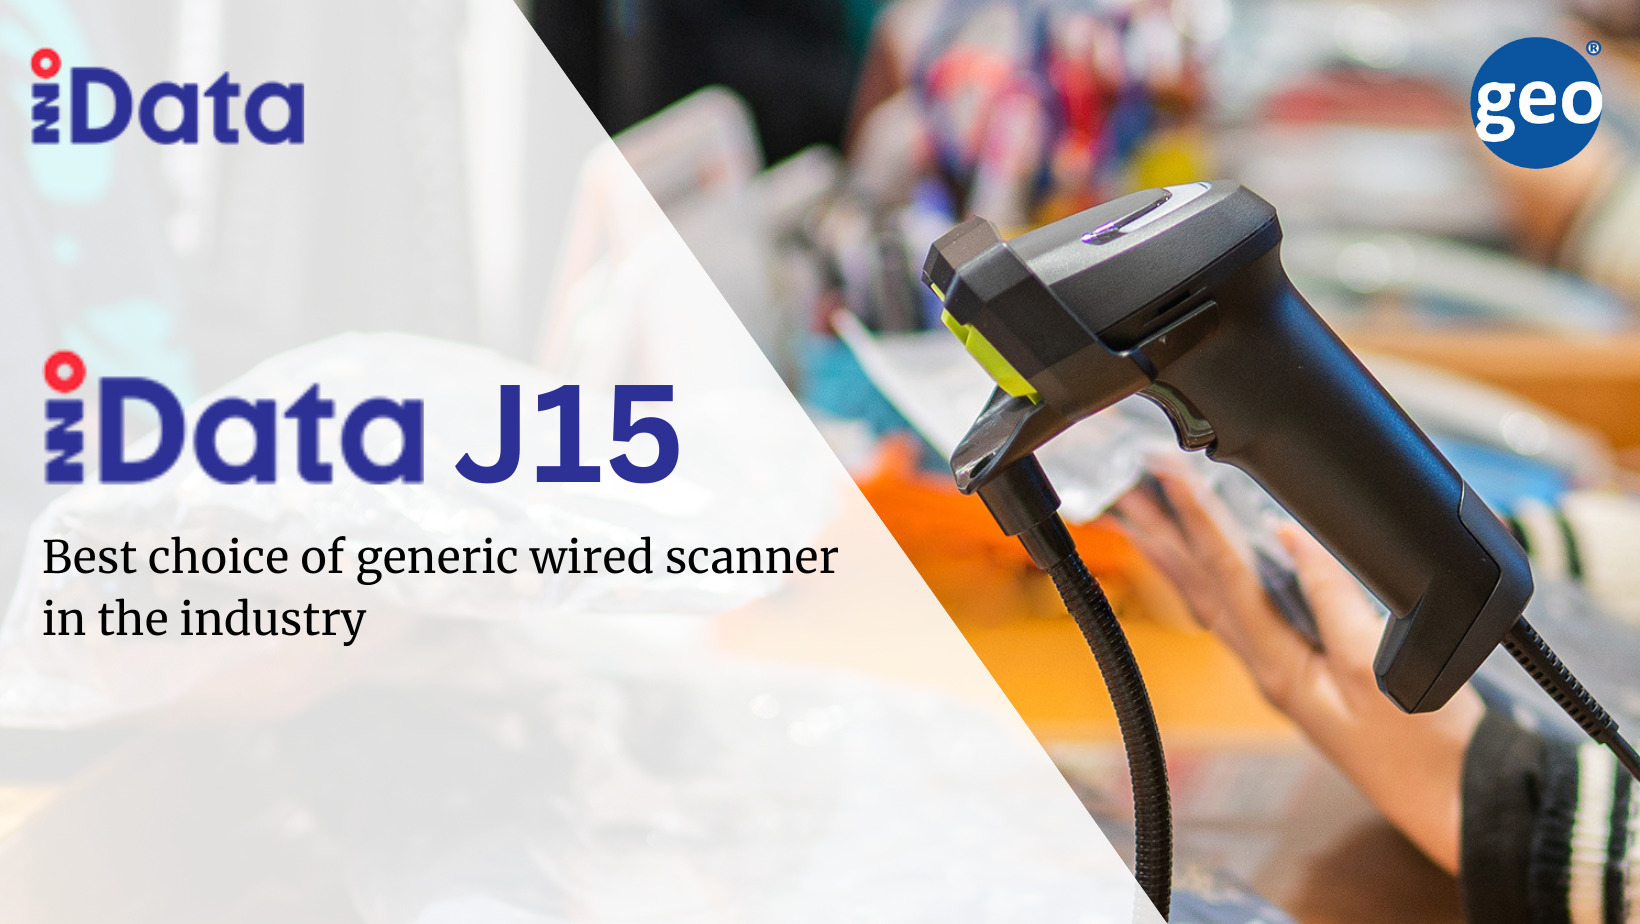 iData: J15 The best choice of generic wired scanner in Retail stores, Logistics & Warehousing, and Express sorting scenarios